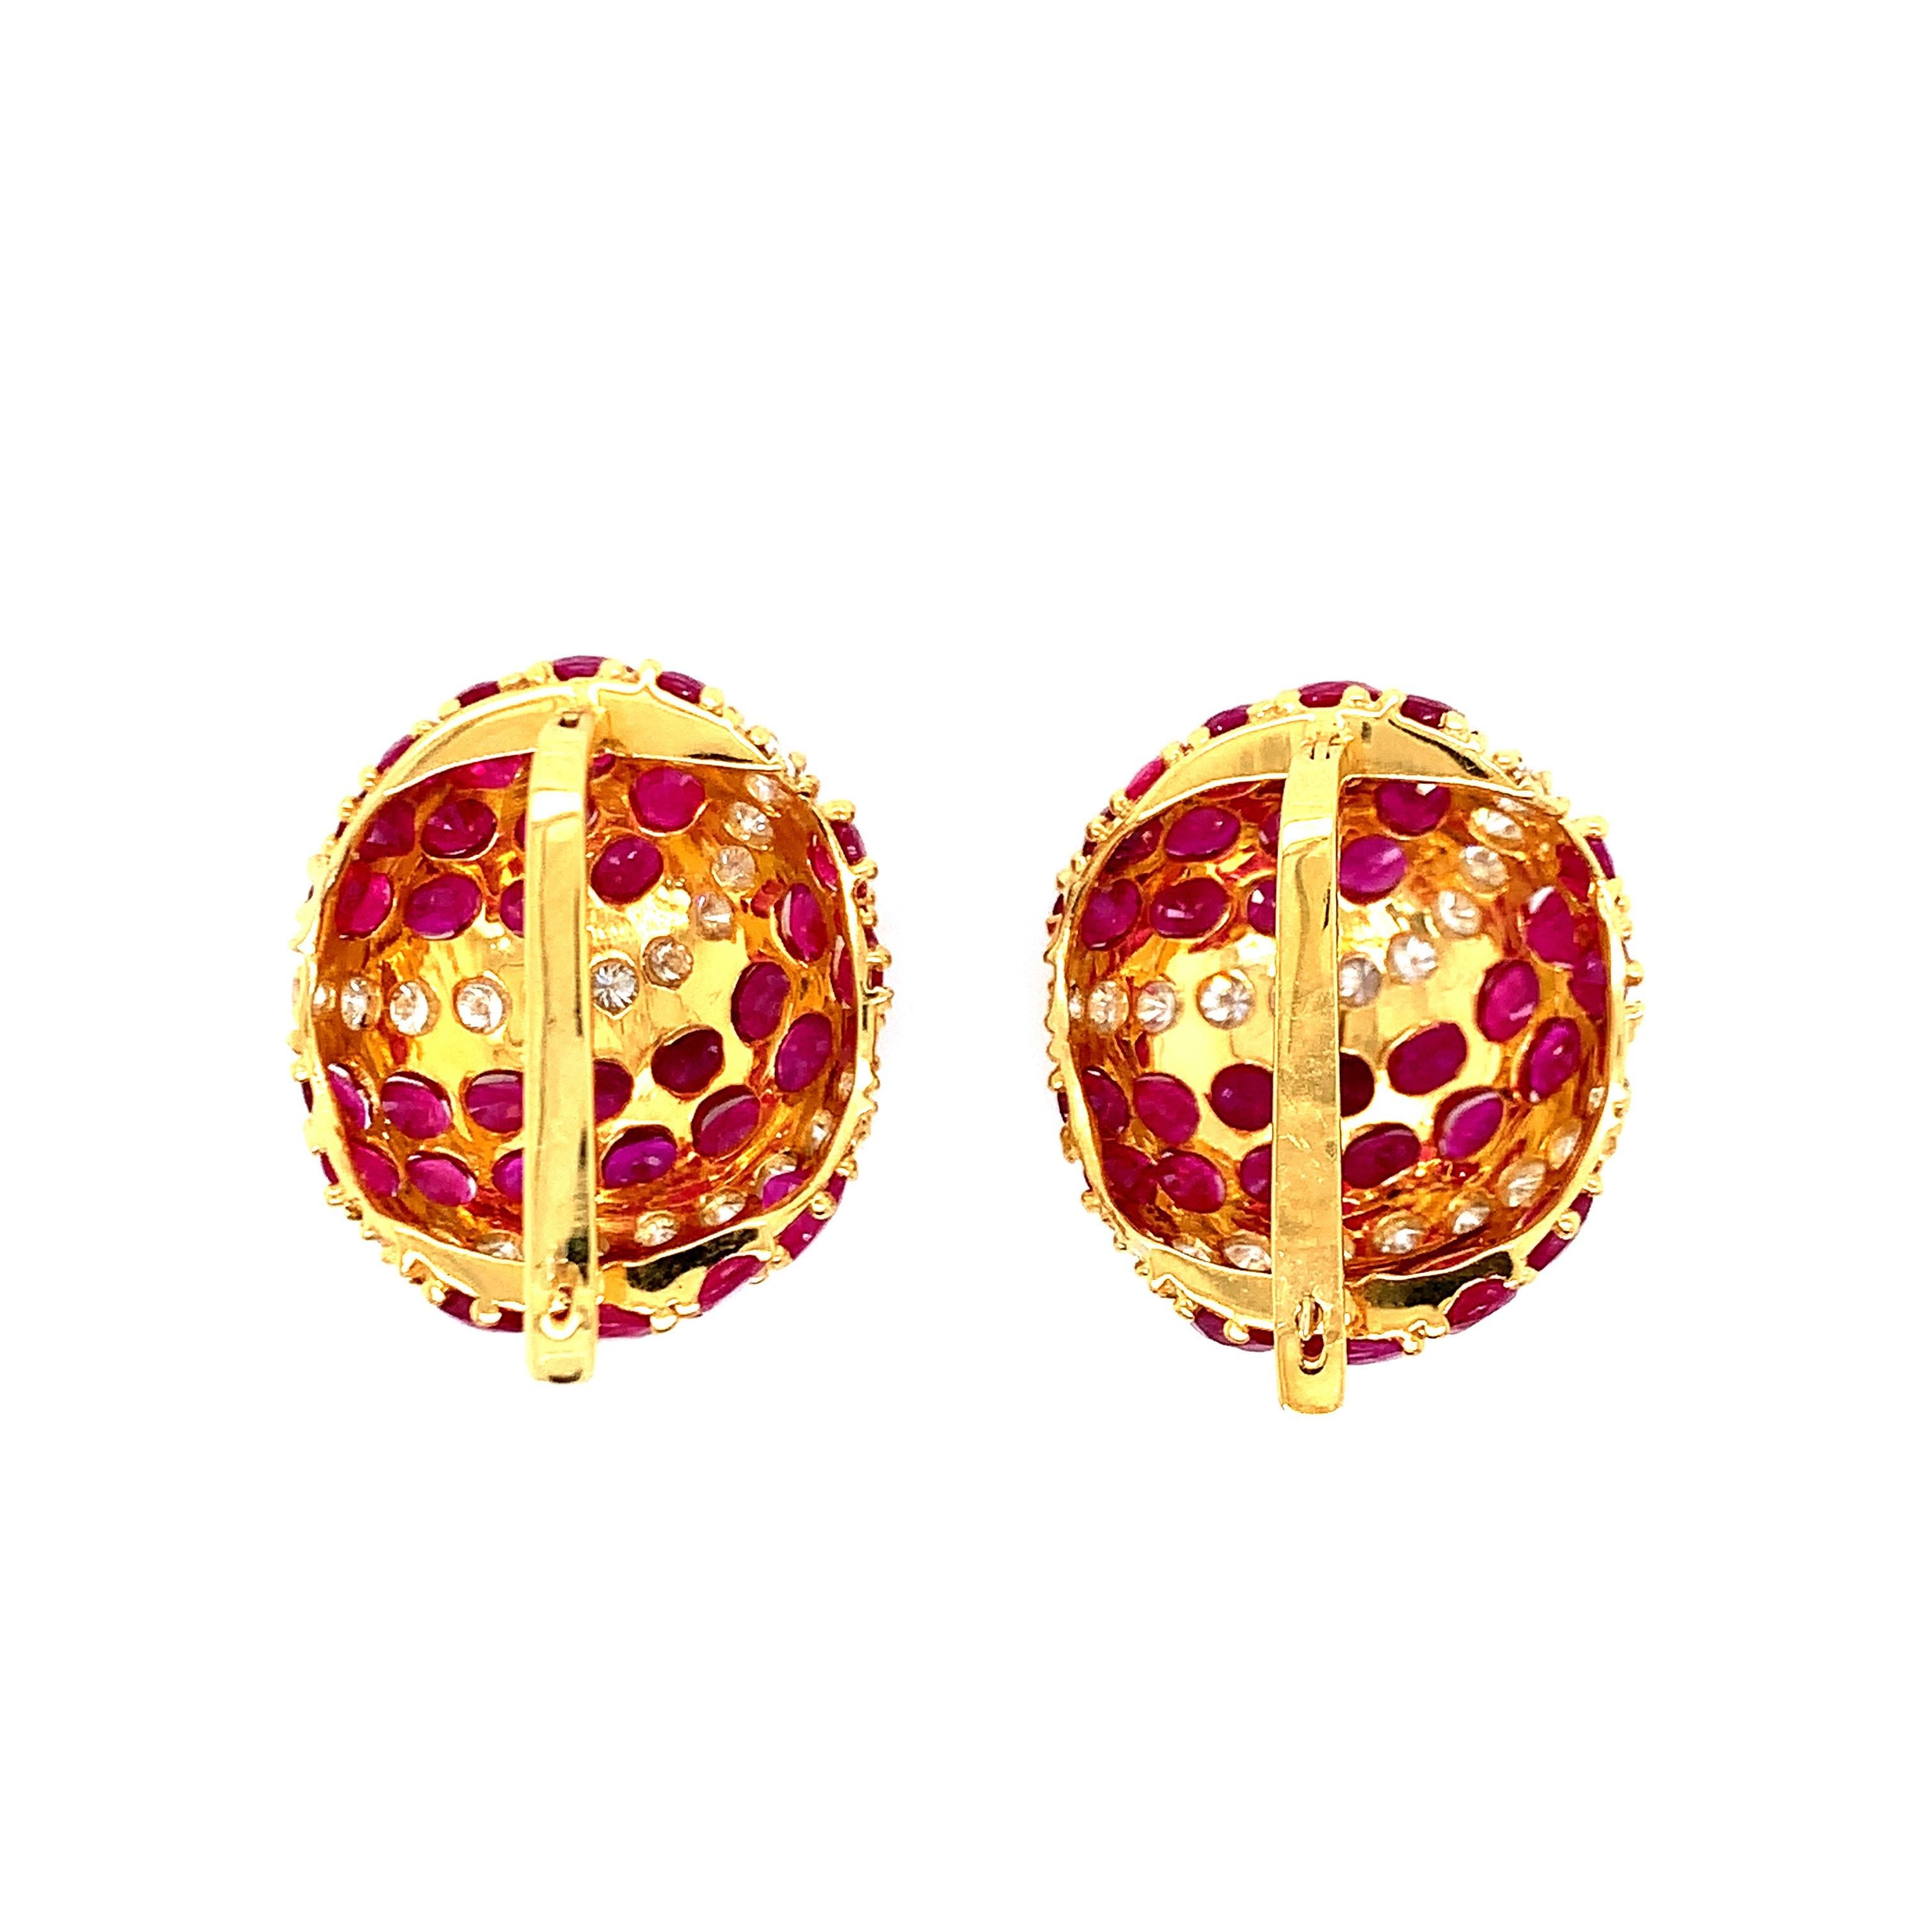 Metal: 14k Gold
Gemstone: Ruby, Diamonds approx. 1.04 ctw
Measurements:  27 x 25 mm
Marked: tested 14k
Weight: 21.8 grams 